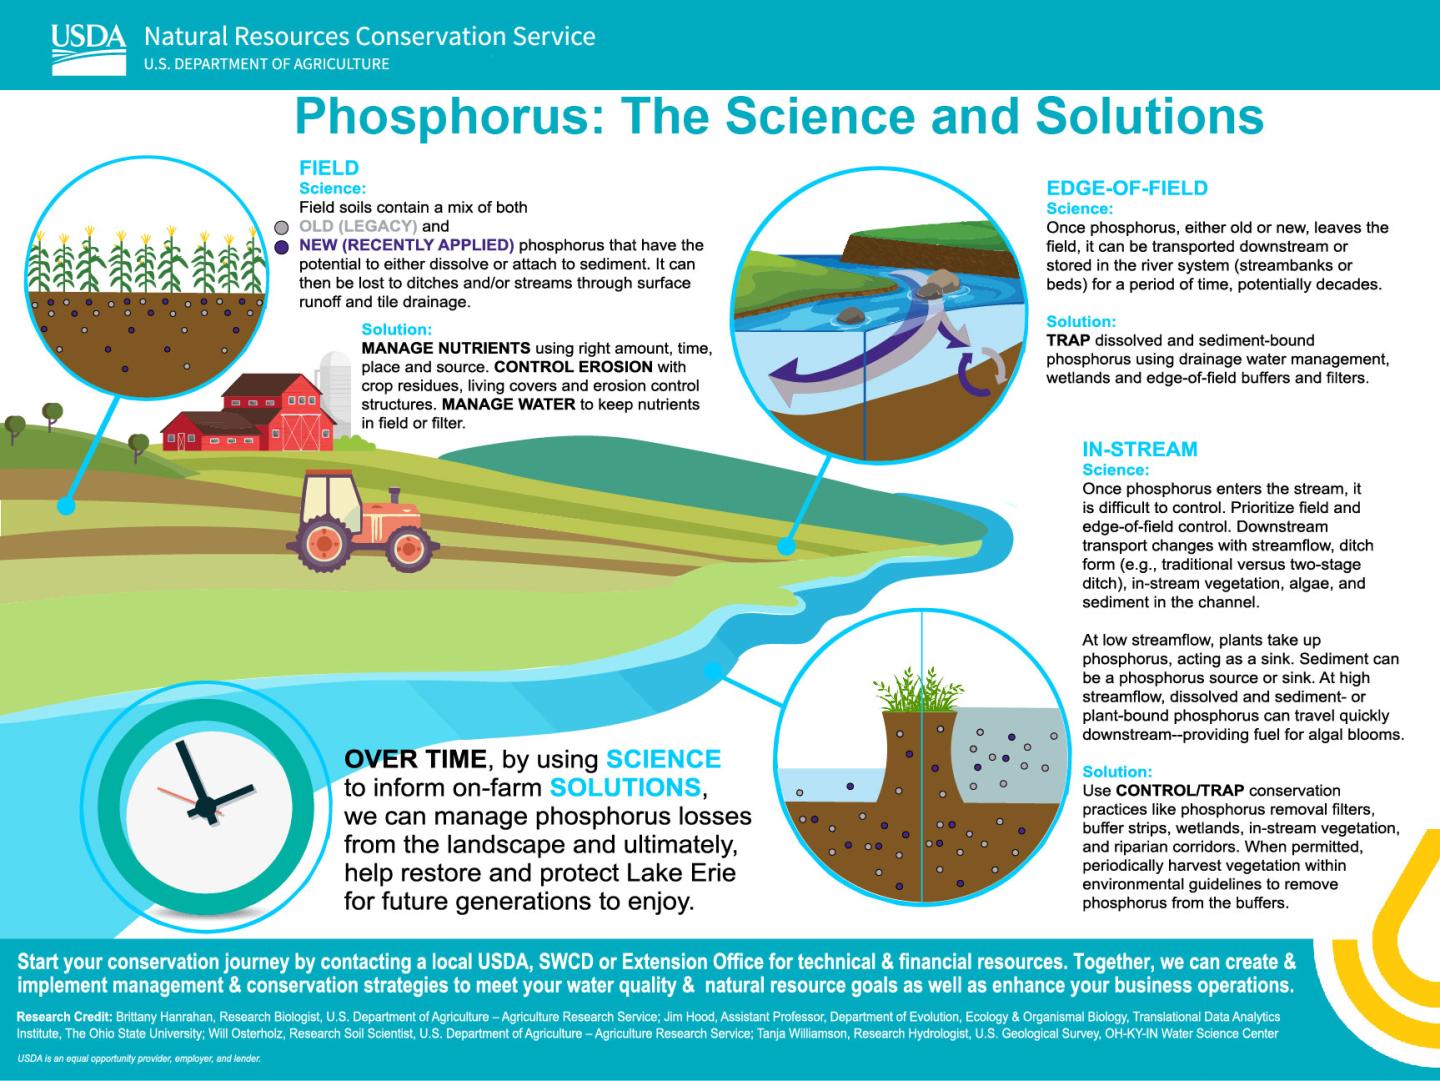 Phosphorus: The Science and Solutions